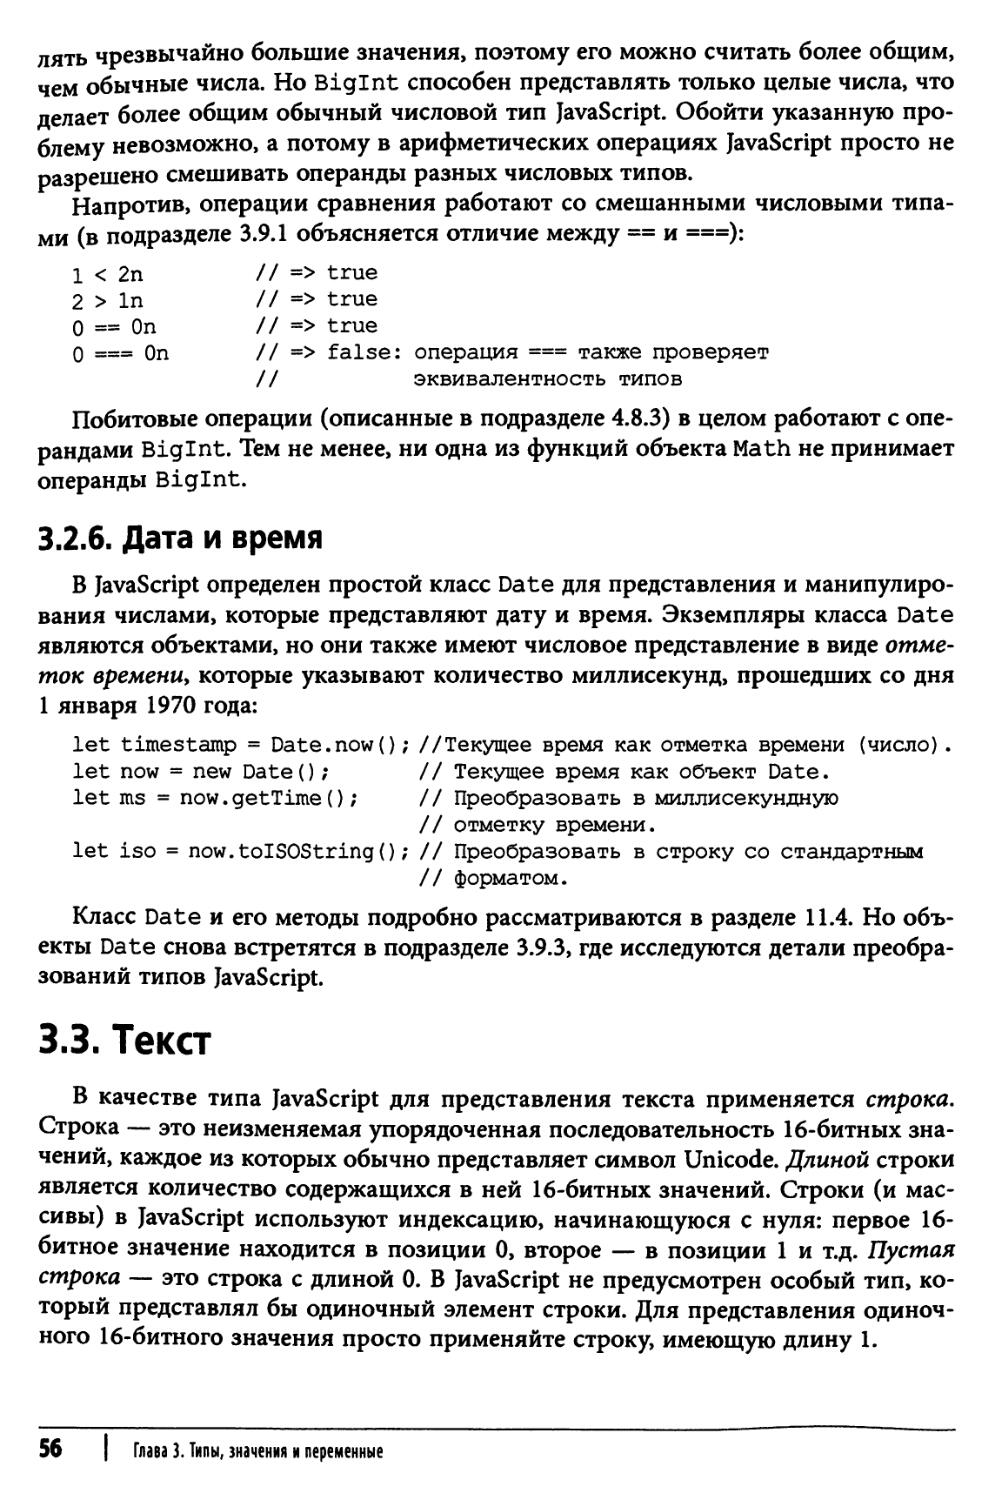 3.3. Текст